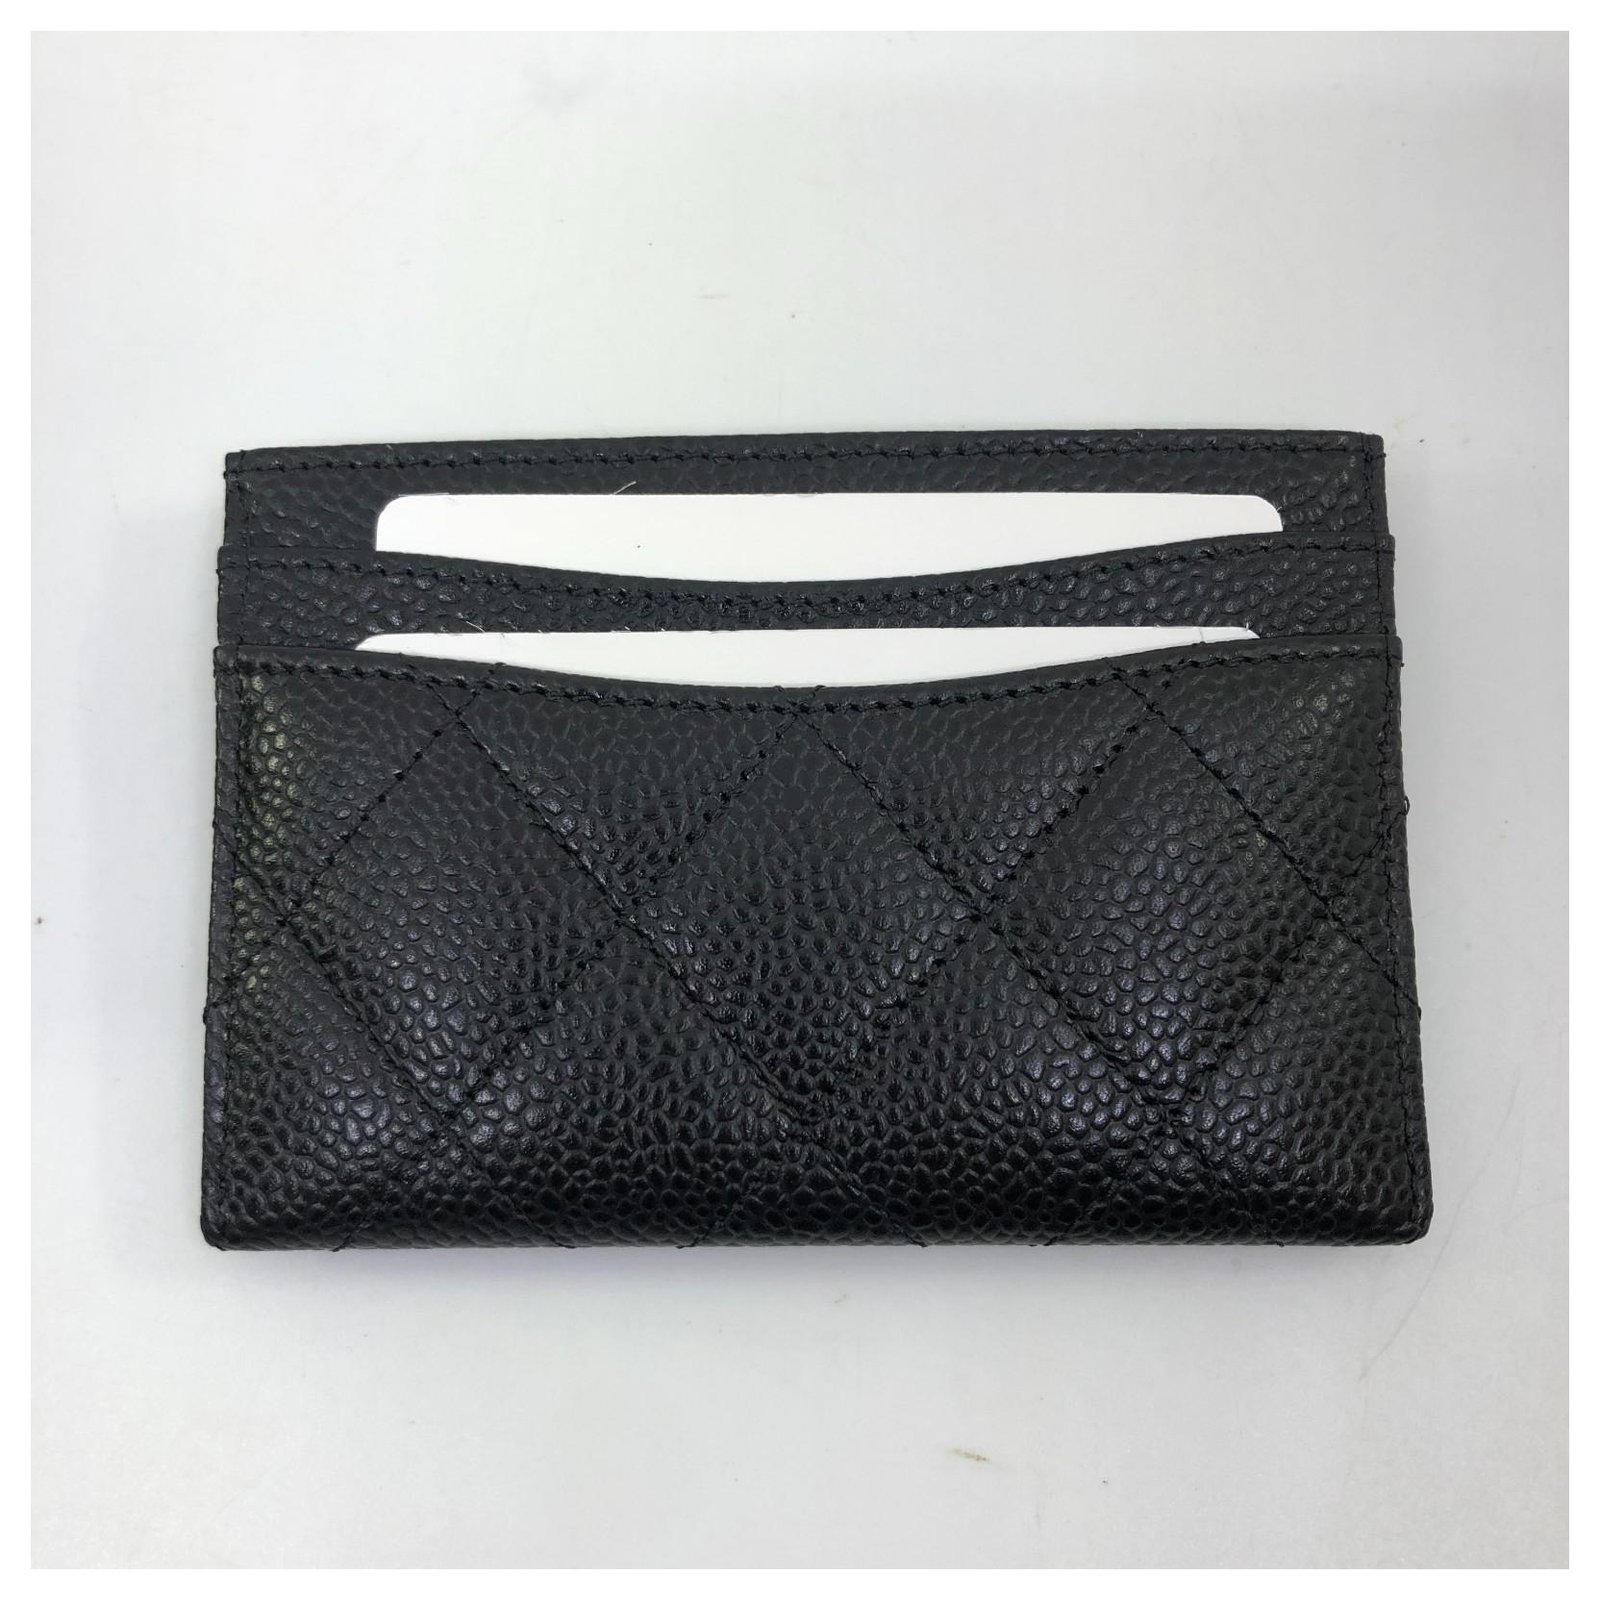 chanel classic card case holder